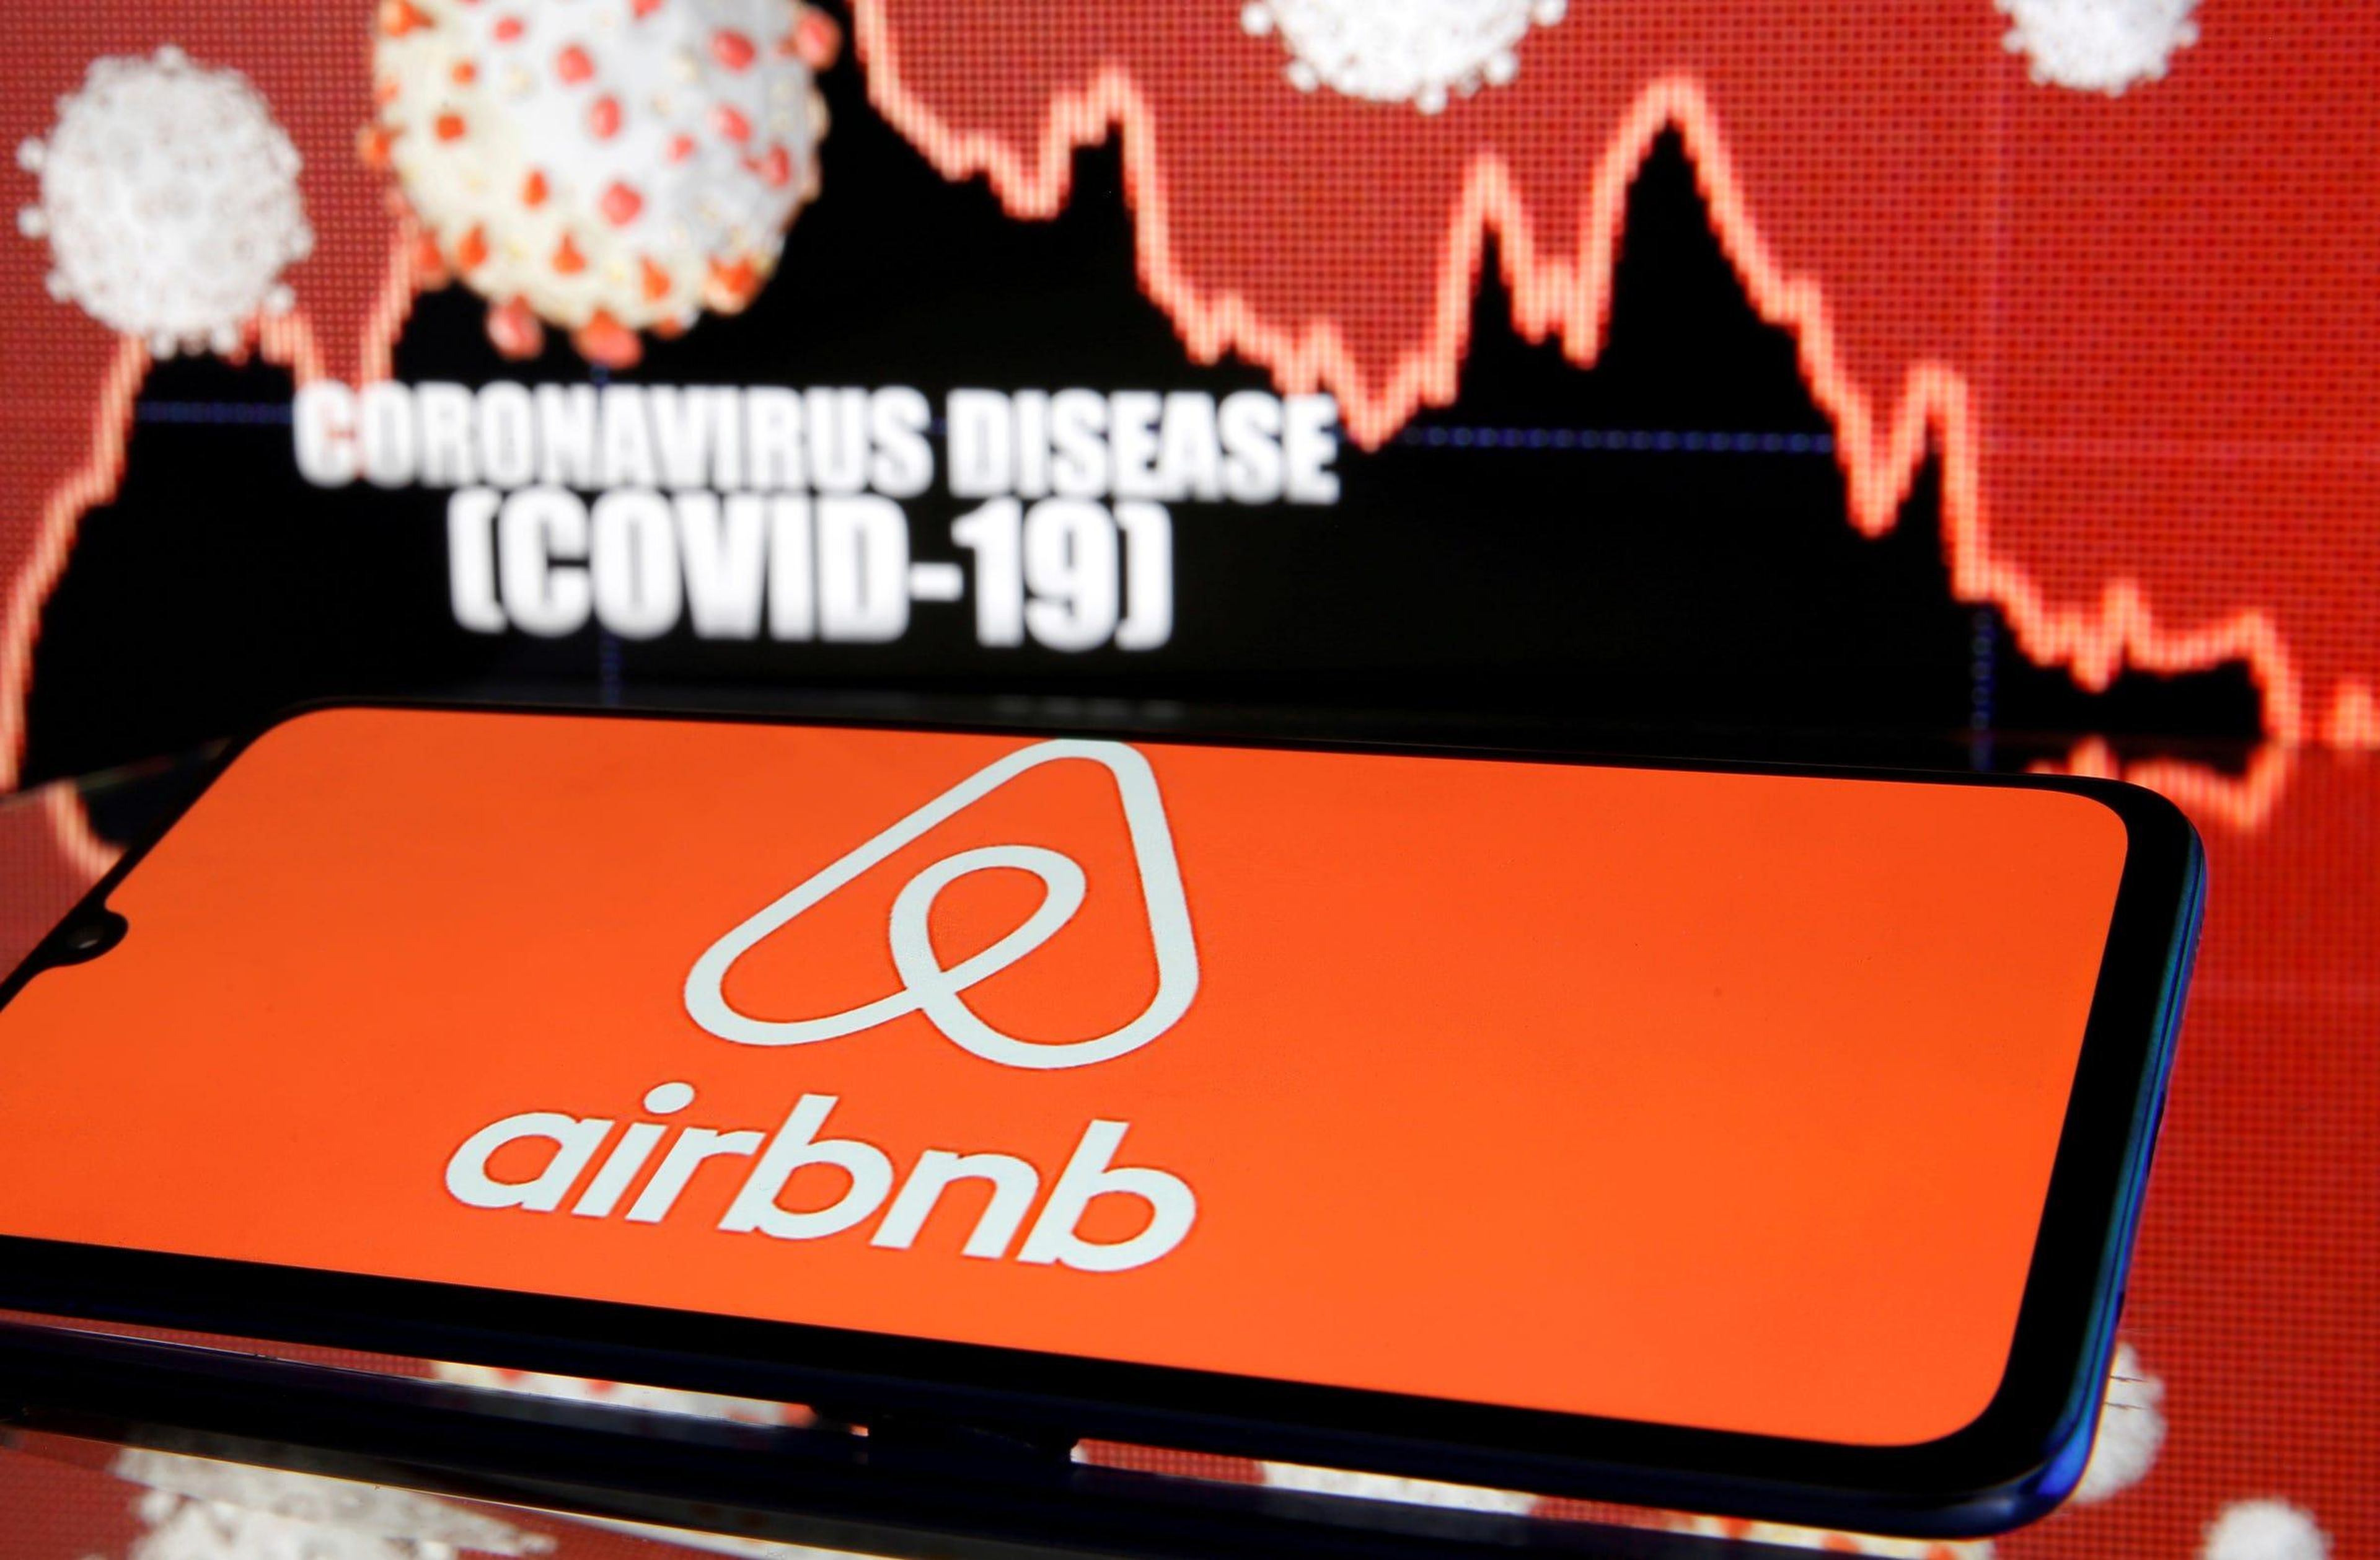 Airbnb has been hit hard by the coronavirus pandemic as travel grinds to a halt globally.